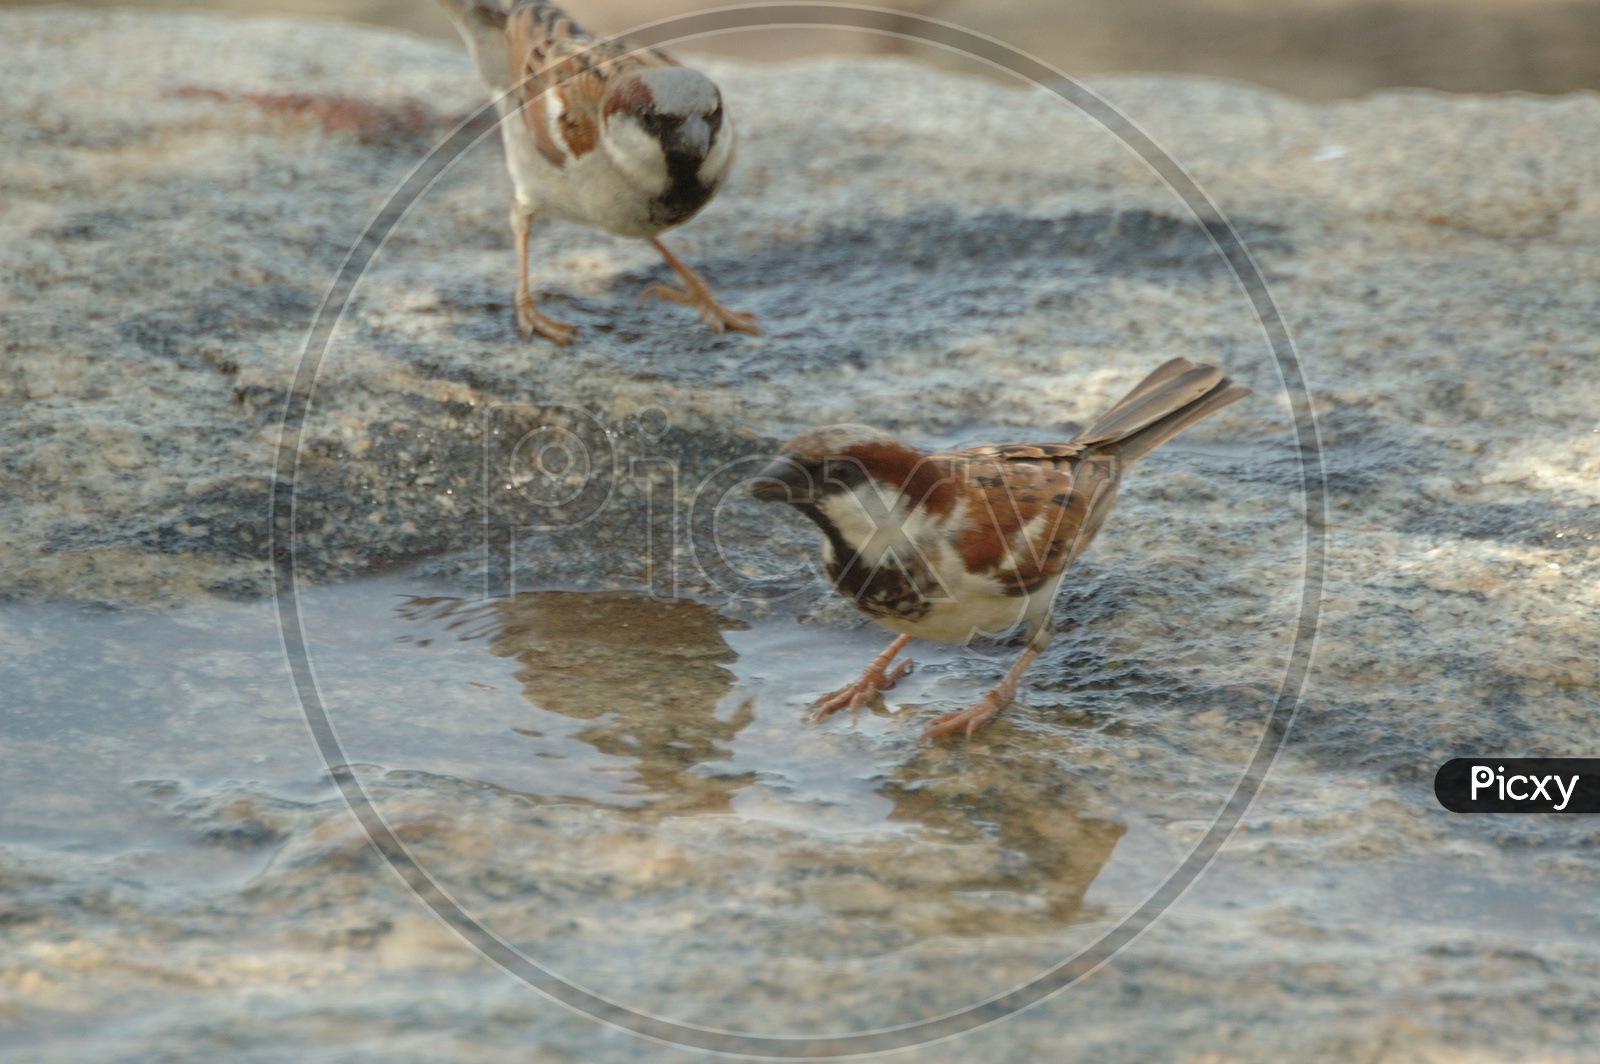 A Couple of house sparrows playing in the water